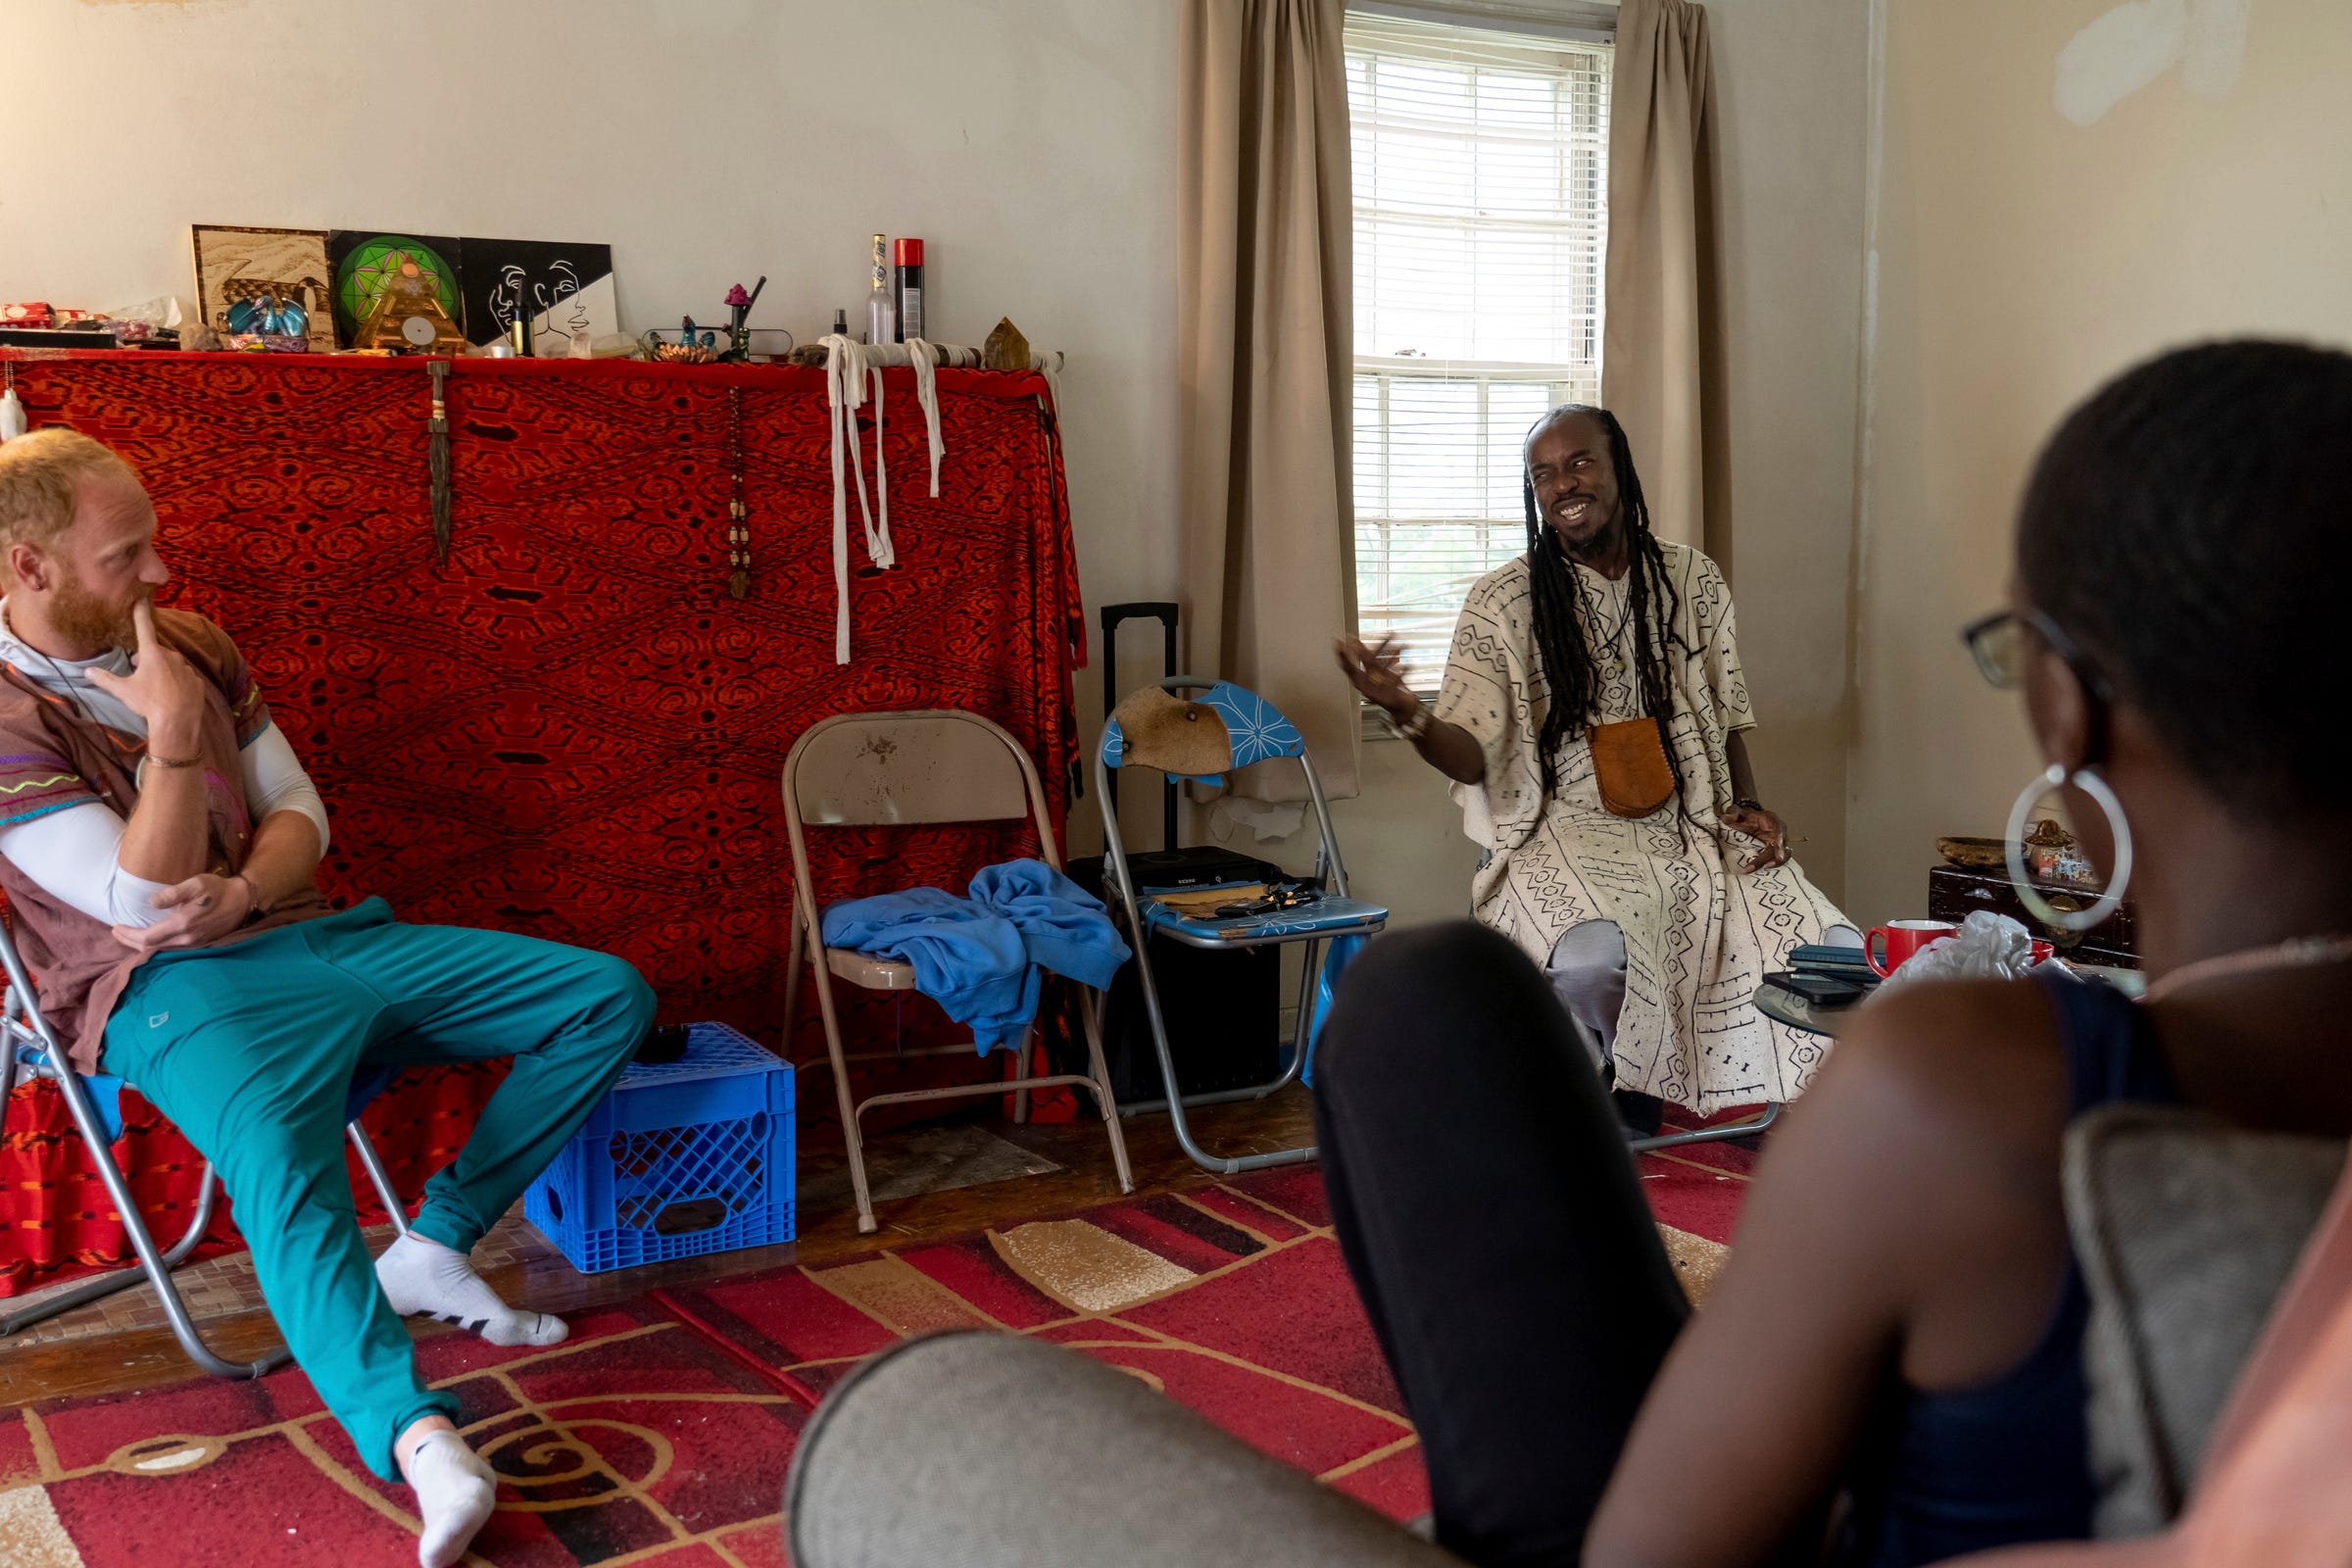 Chris LaManna, of Warren, and Psychonaut Academy of Detroit founder Sincere Seven talk with Alexis Smith, 29, of Inkster, while sitting in a room at the academy on Thursday, July 13, 2022.